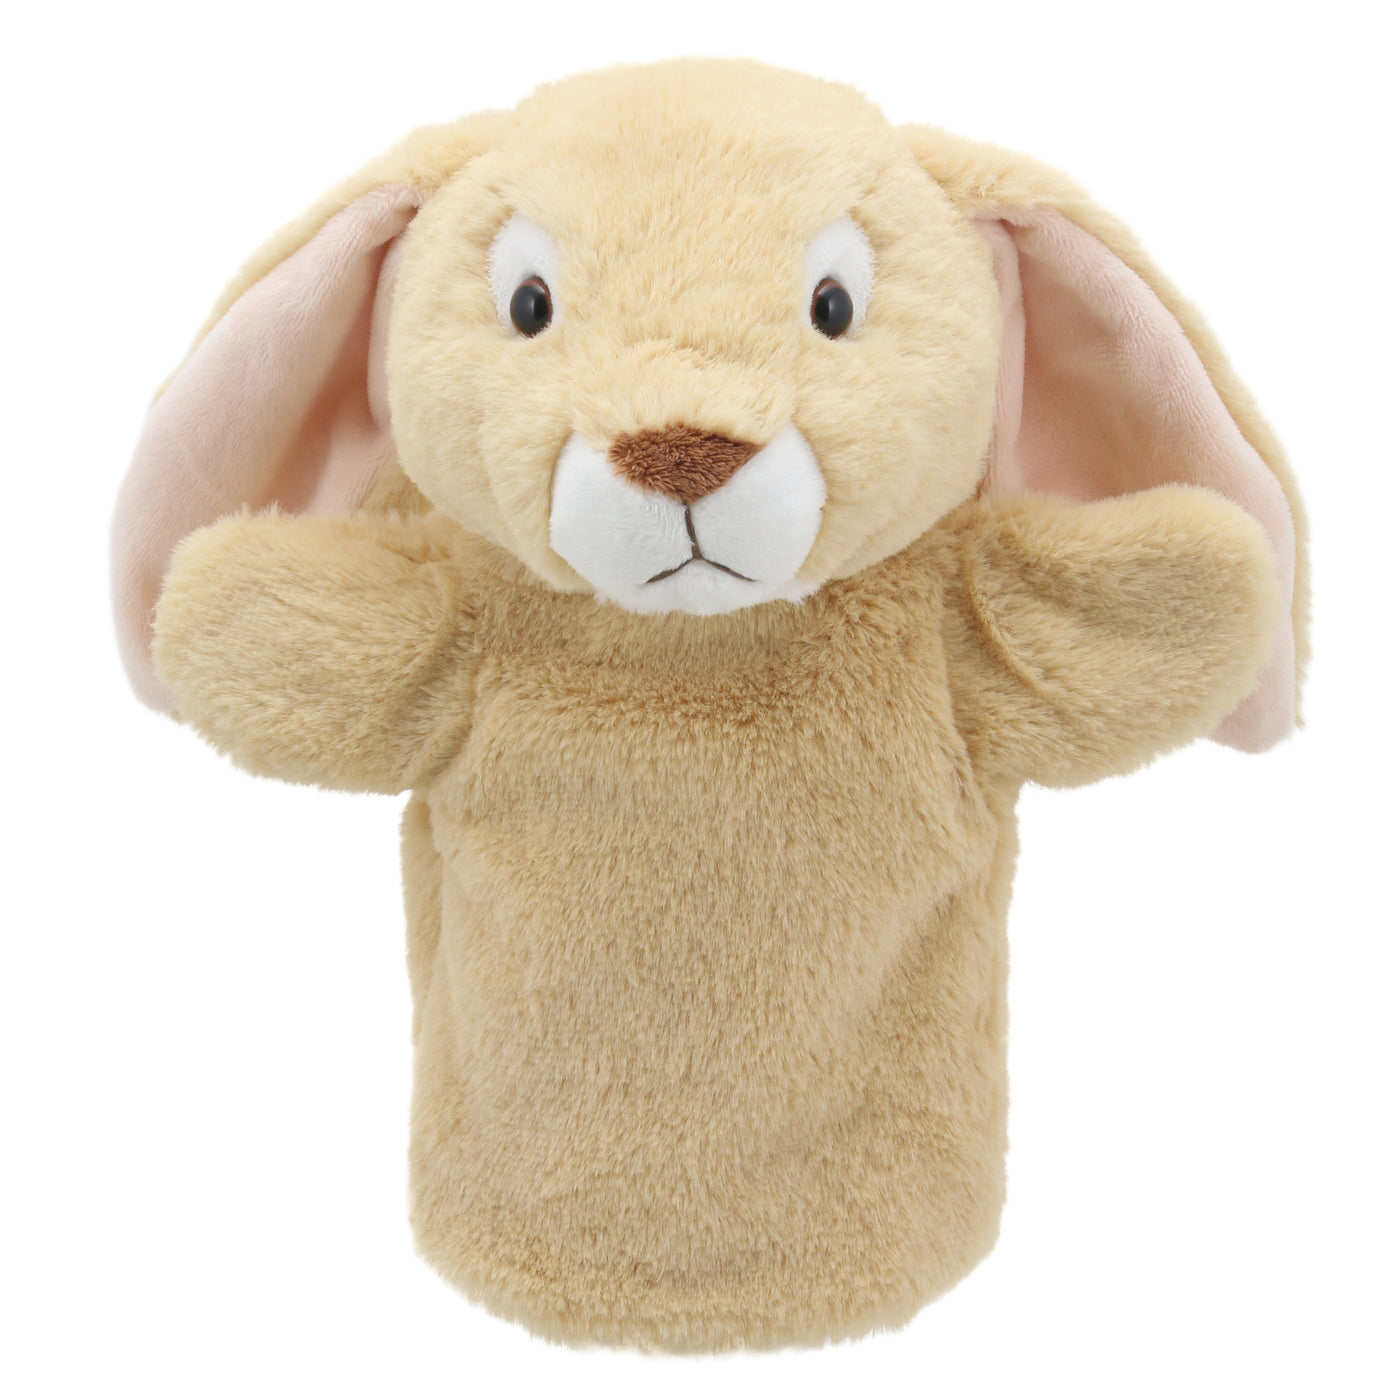 Eco Puppet Buddies - Rabbit (Lop Eared)